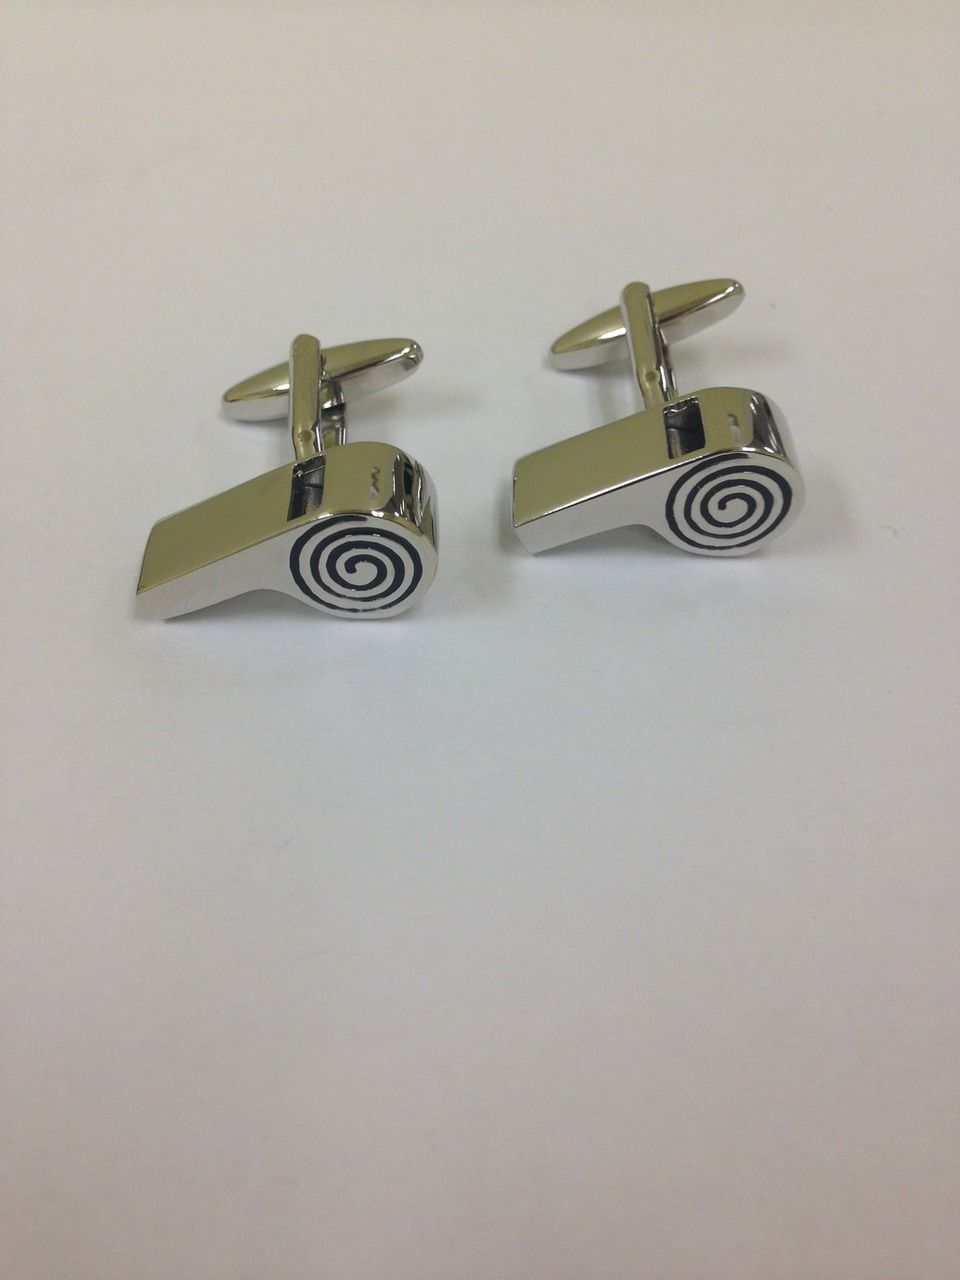 2 Pc. Real Working Whistle Silver Cufflinks